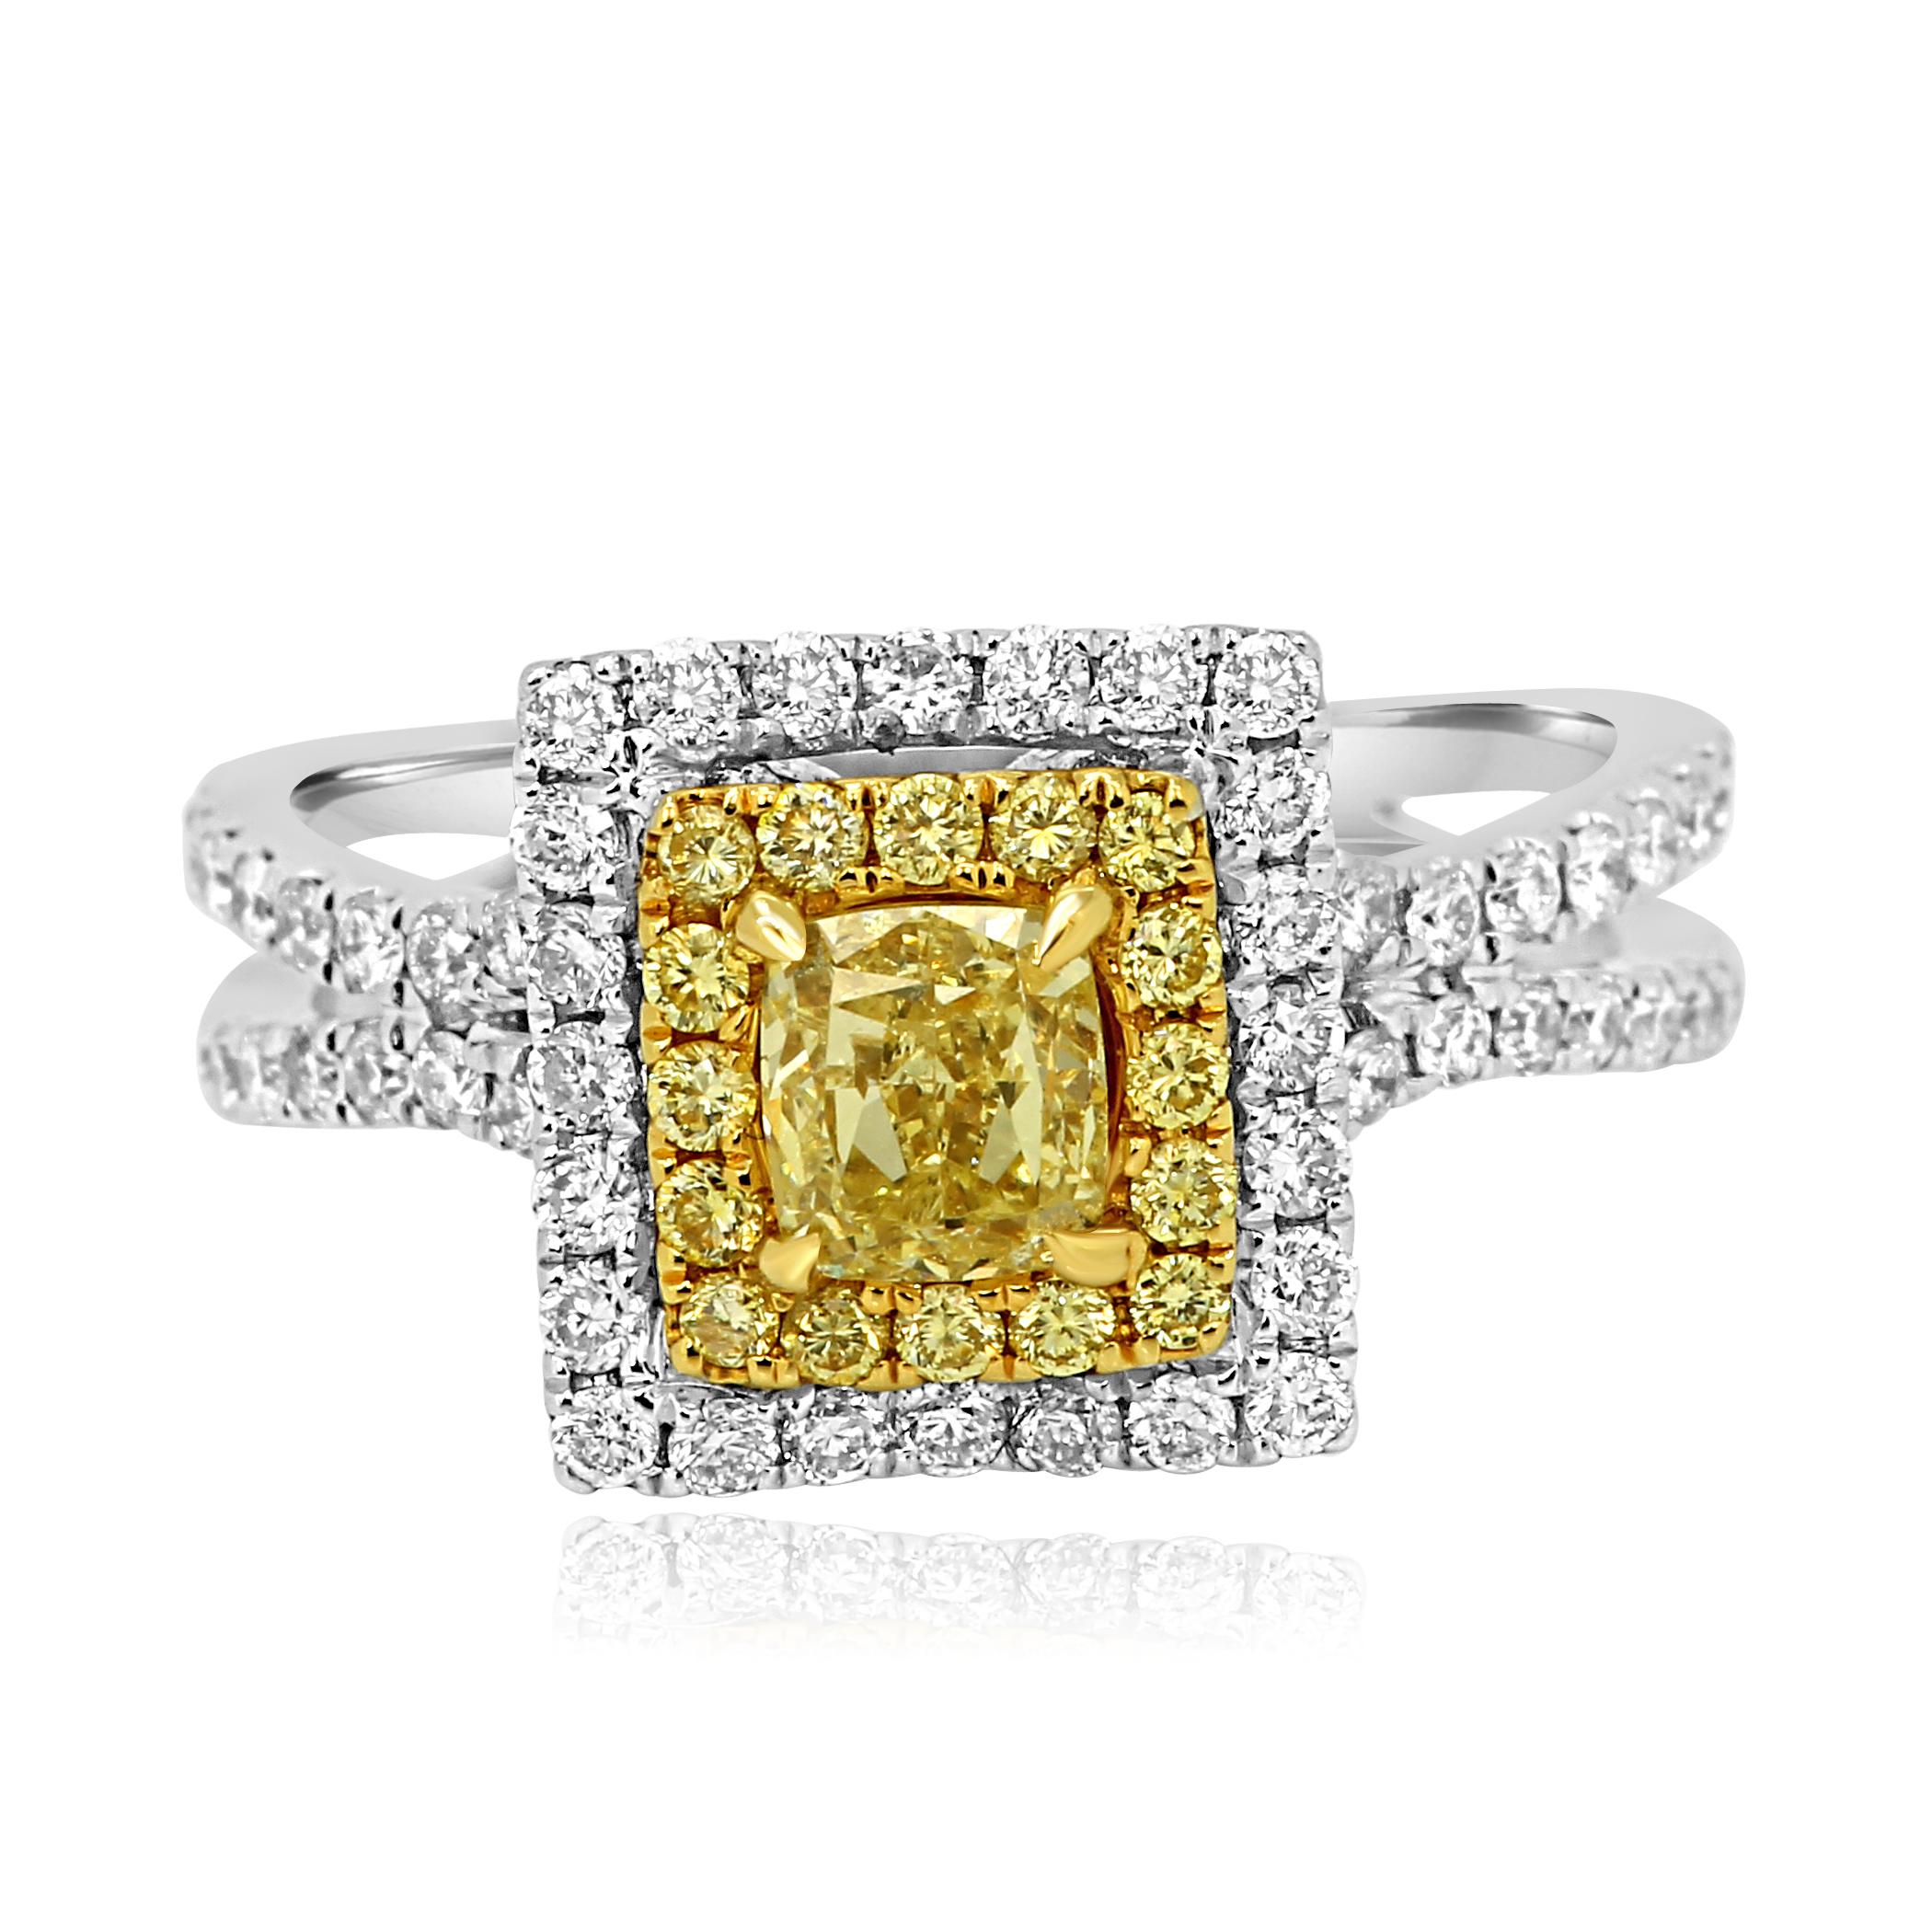 Natural Fancy Yellow Cushion 0.64 Carat in double Halo of natural fancy yellow round 0.19 Carat and white diamond round 1.00 Carat. In split prong 18K White and Yellow Gold ring.

Style available in different price ranges. Prices are based on your